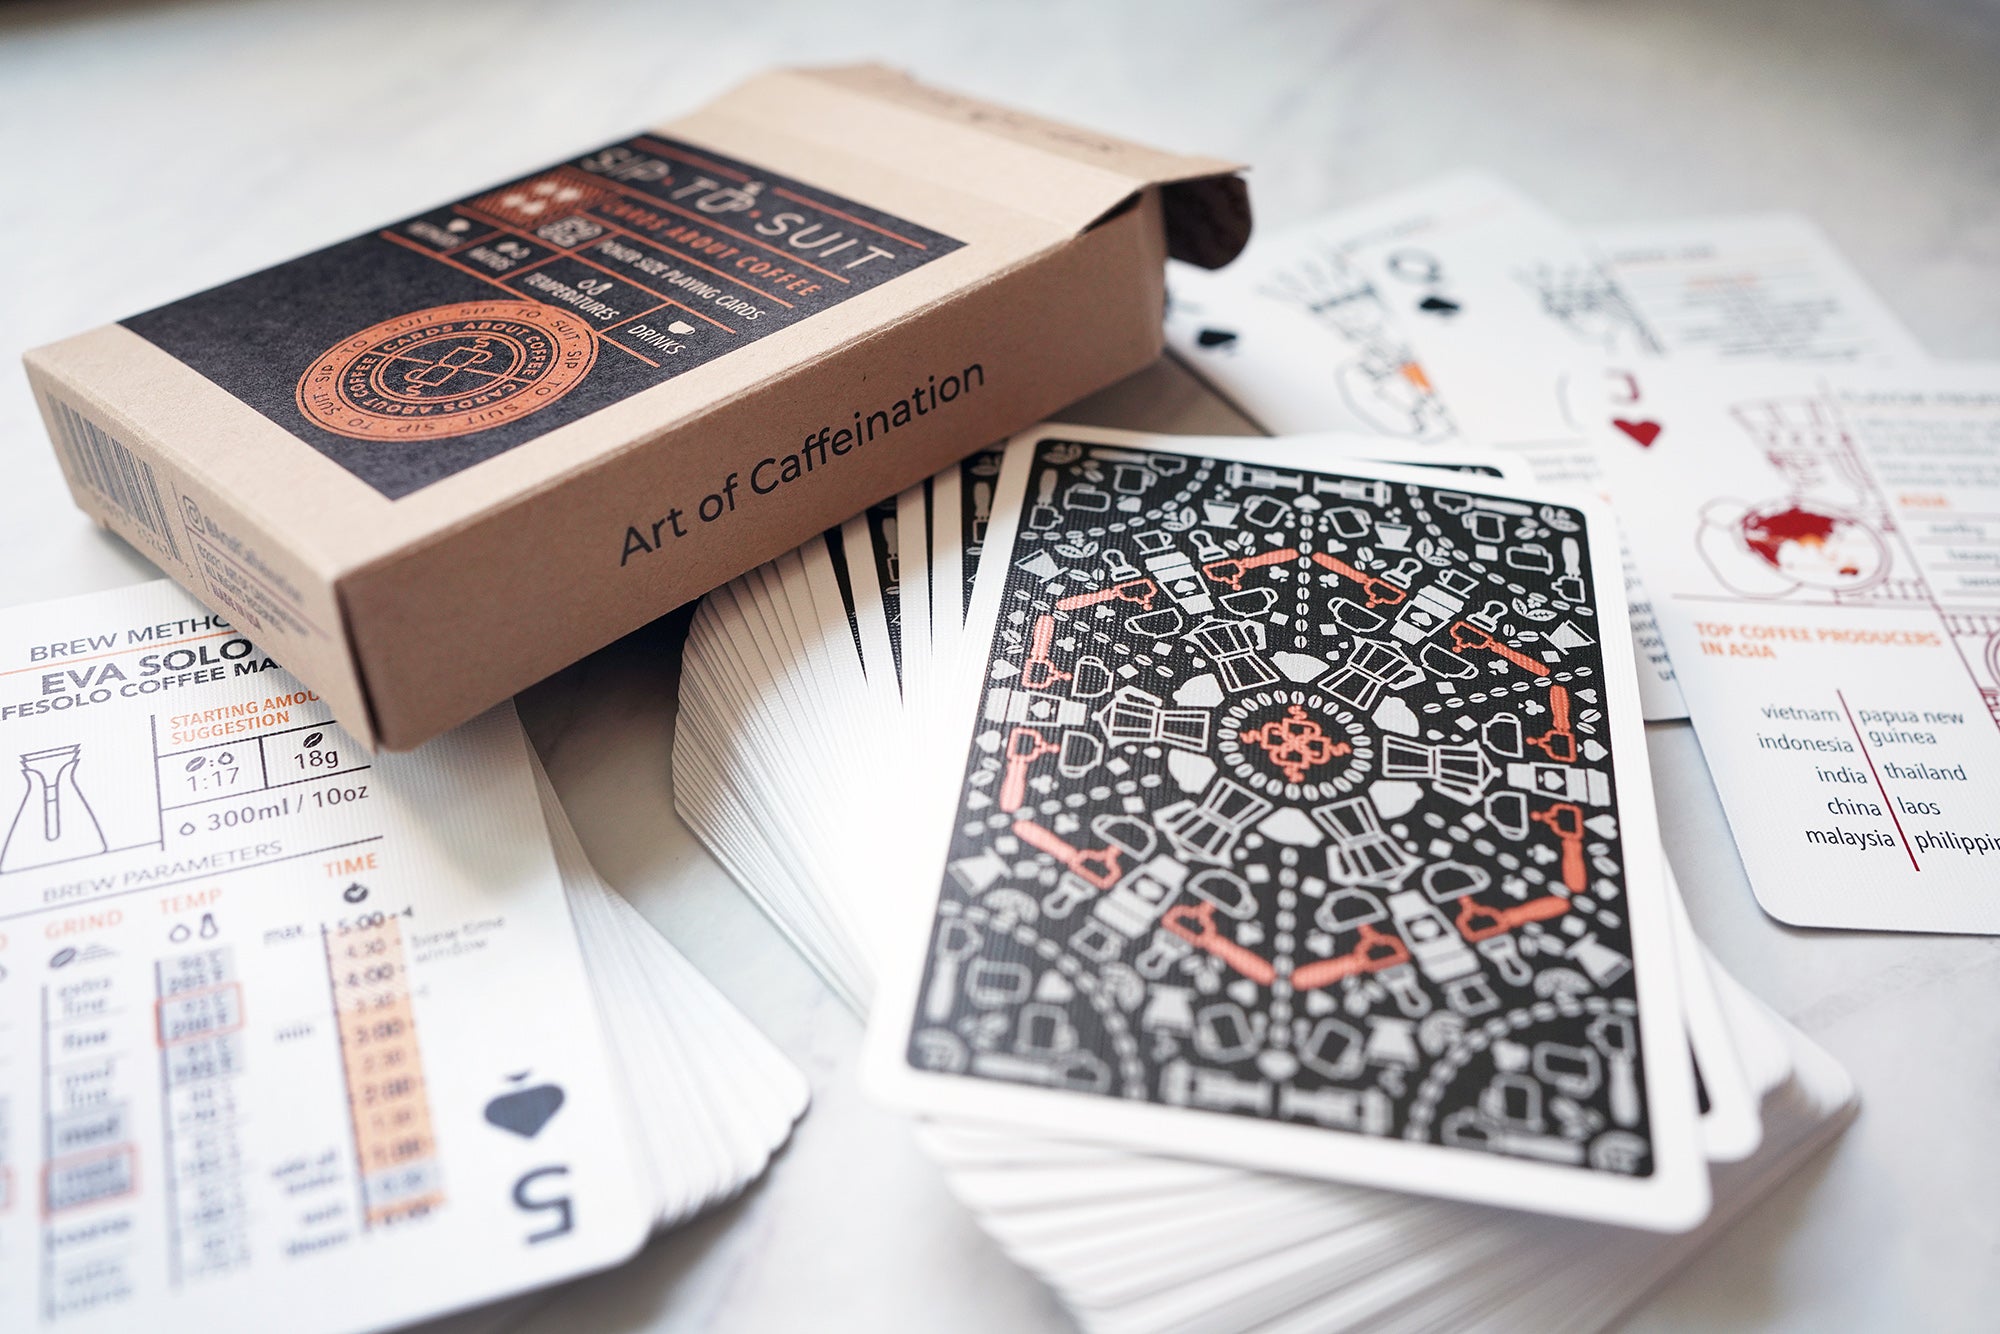 Coffee Informational playing cards by Art of Caffeination